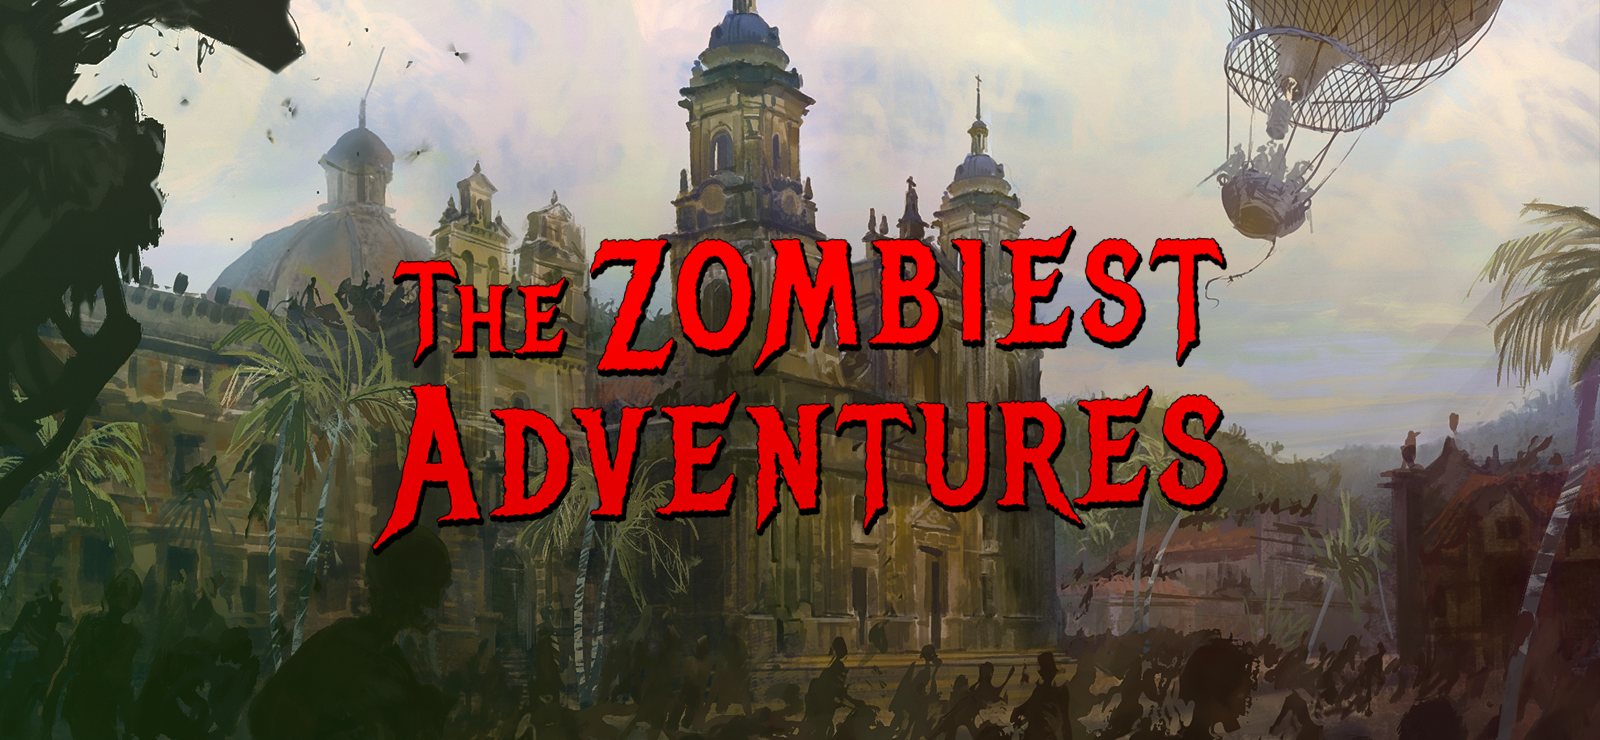 Blood & Gold: Caribbean! - The Zombiest Adventures